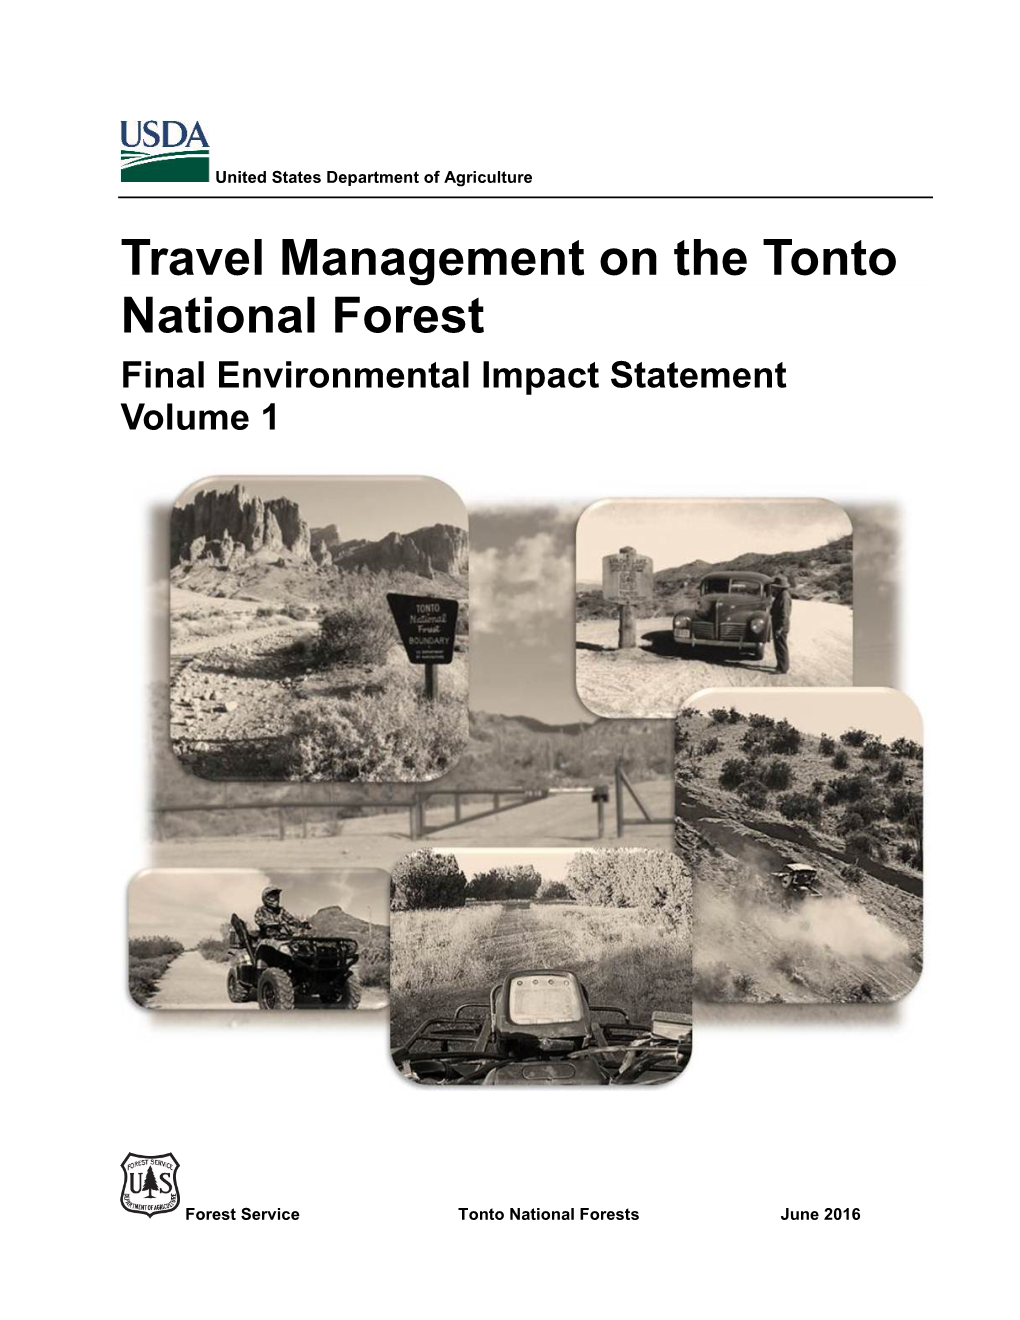 Travel Management on the Tonto National Forest FEIS